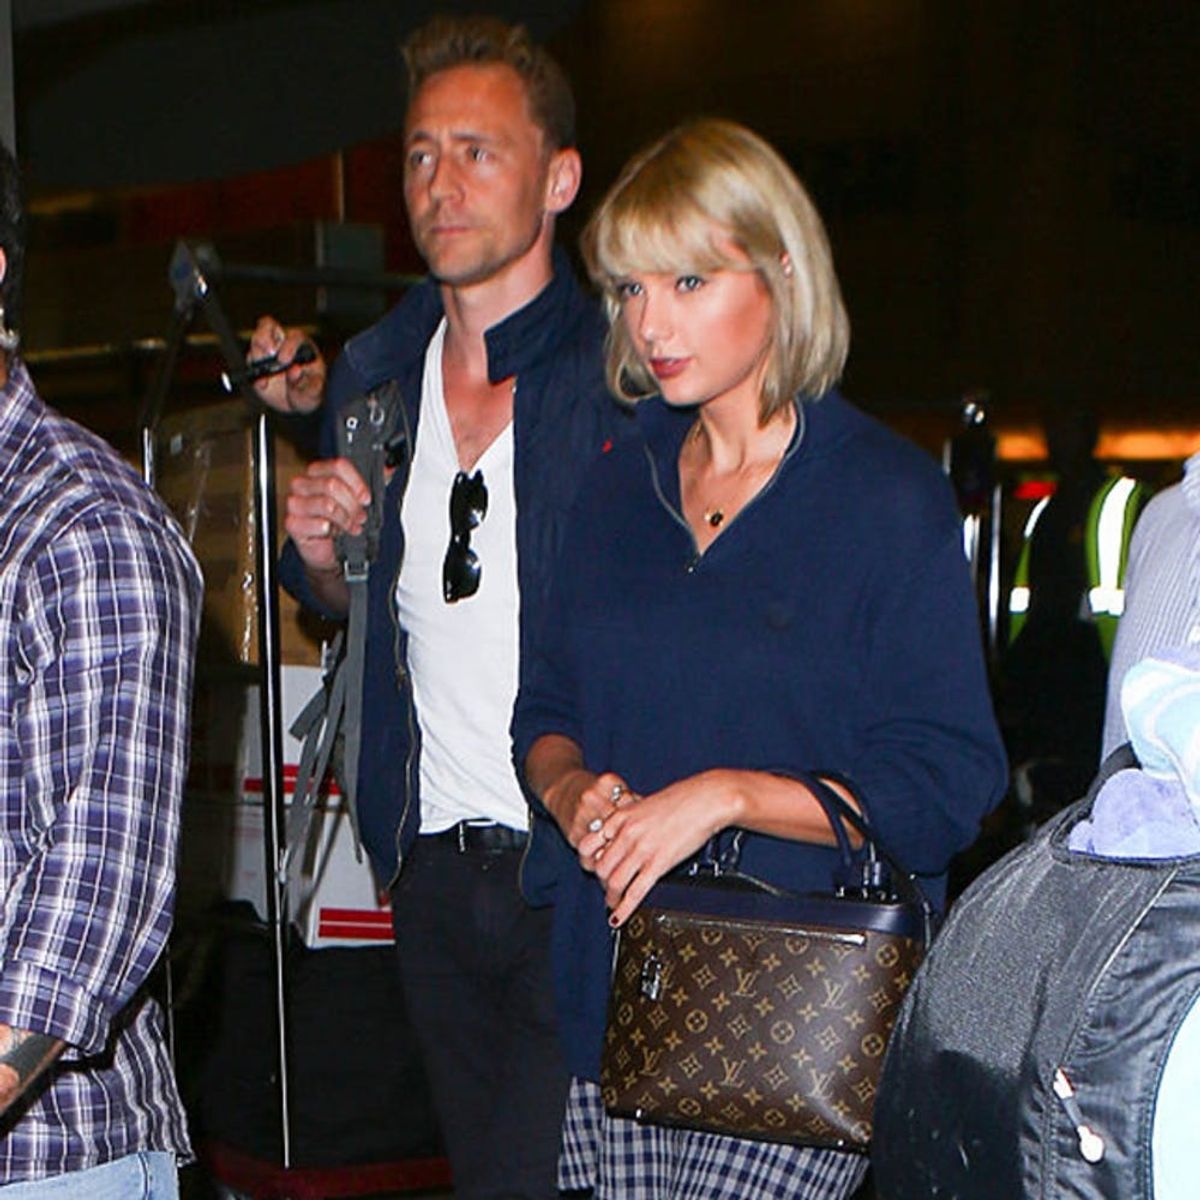 Tom Hiddleston Just Confirmed Once and For All That He and T. Swift Are *Officially* a Couple